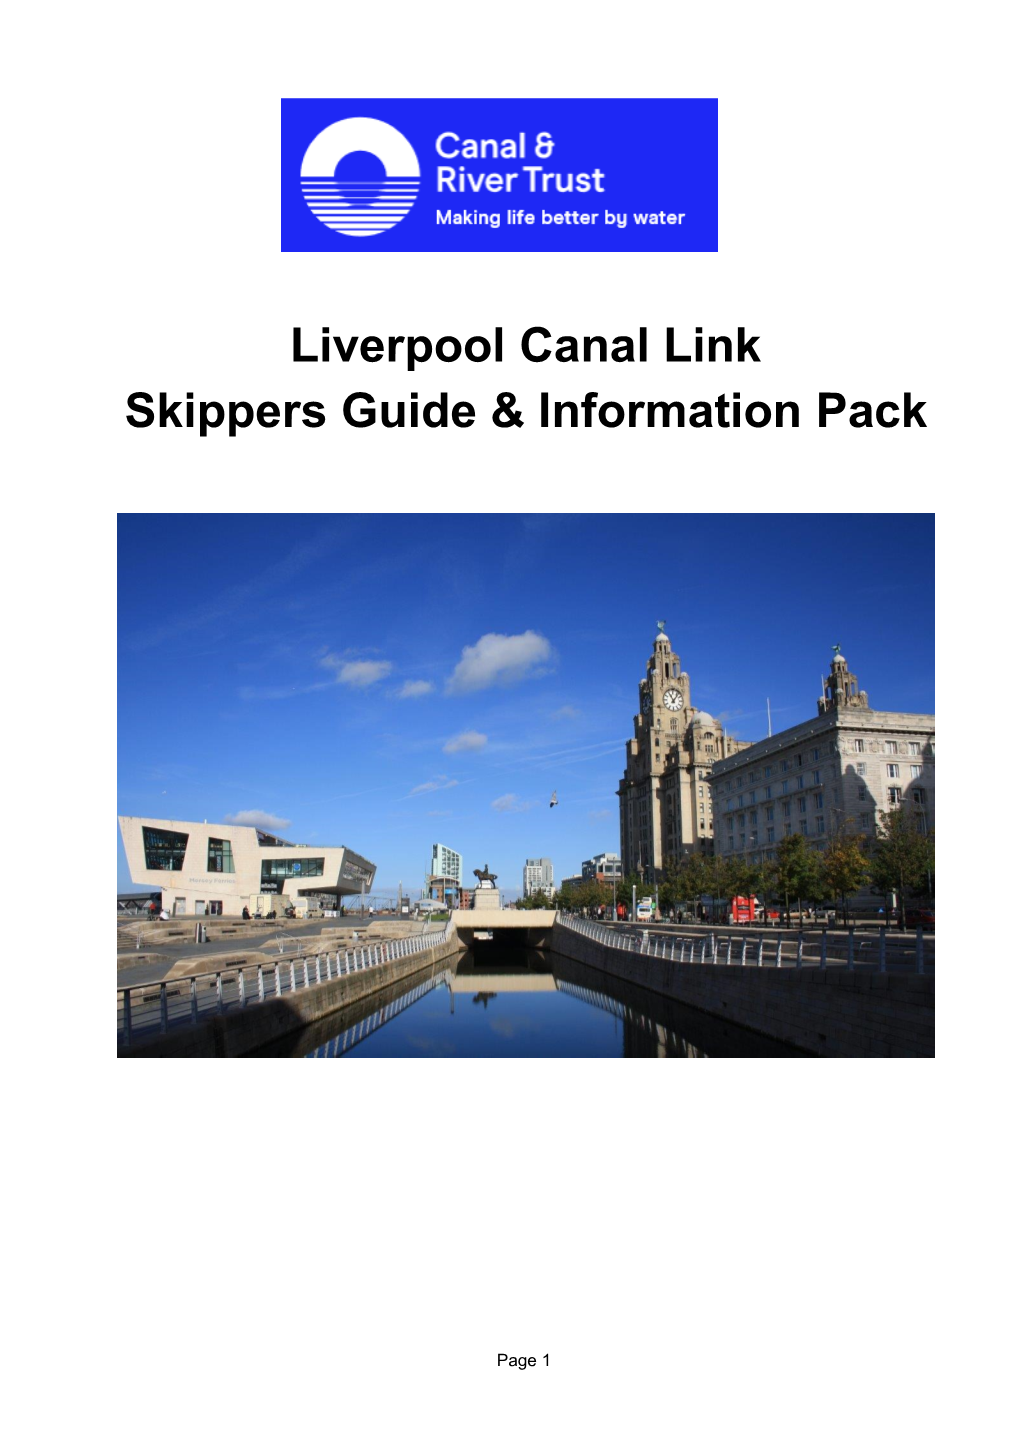 Liverpool Canal Link Skippers Guide & Information Pack